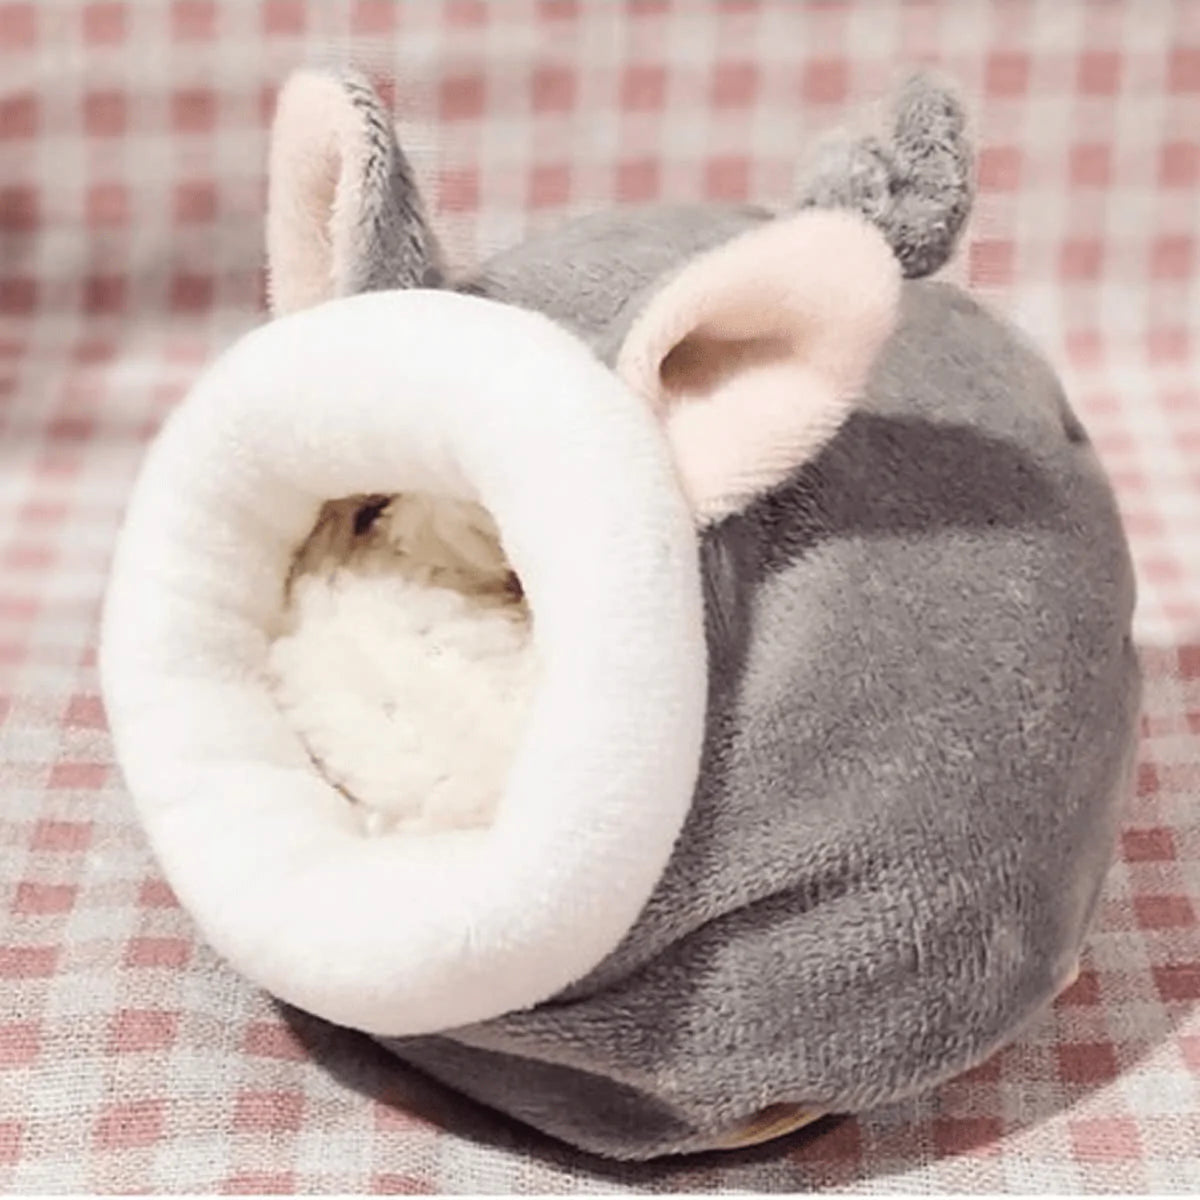 YUEKUA Bed House Soft Hamster House Bed, Cotton Nest and Cushion, Small Pet Animal Habitat Warm Nest Bed Accessories for Hamsters, Guinea Pigs, Hedgehogs Animals & Pet Supplies > Pet Supplies > Small Animal Supplies > Small Animal Habitat Accessories YUEKUA   